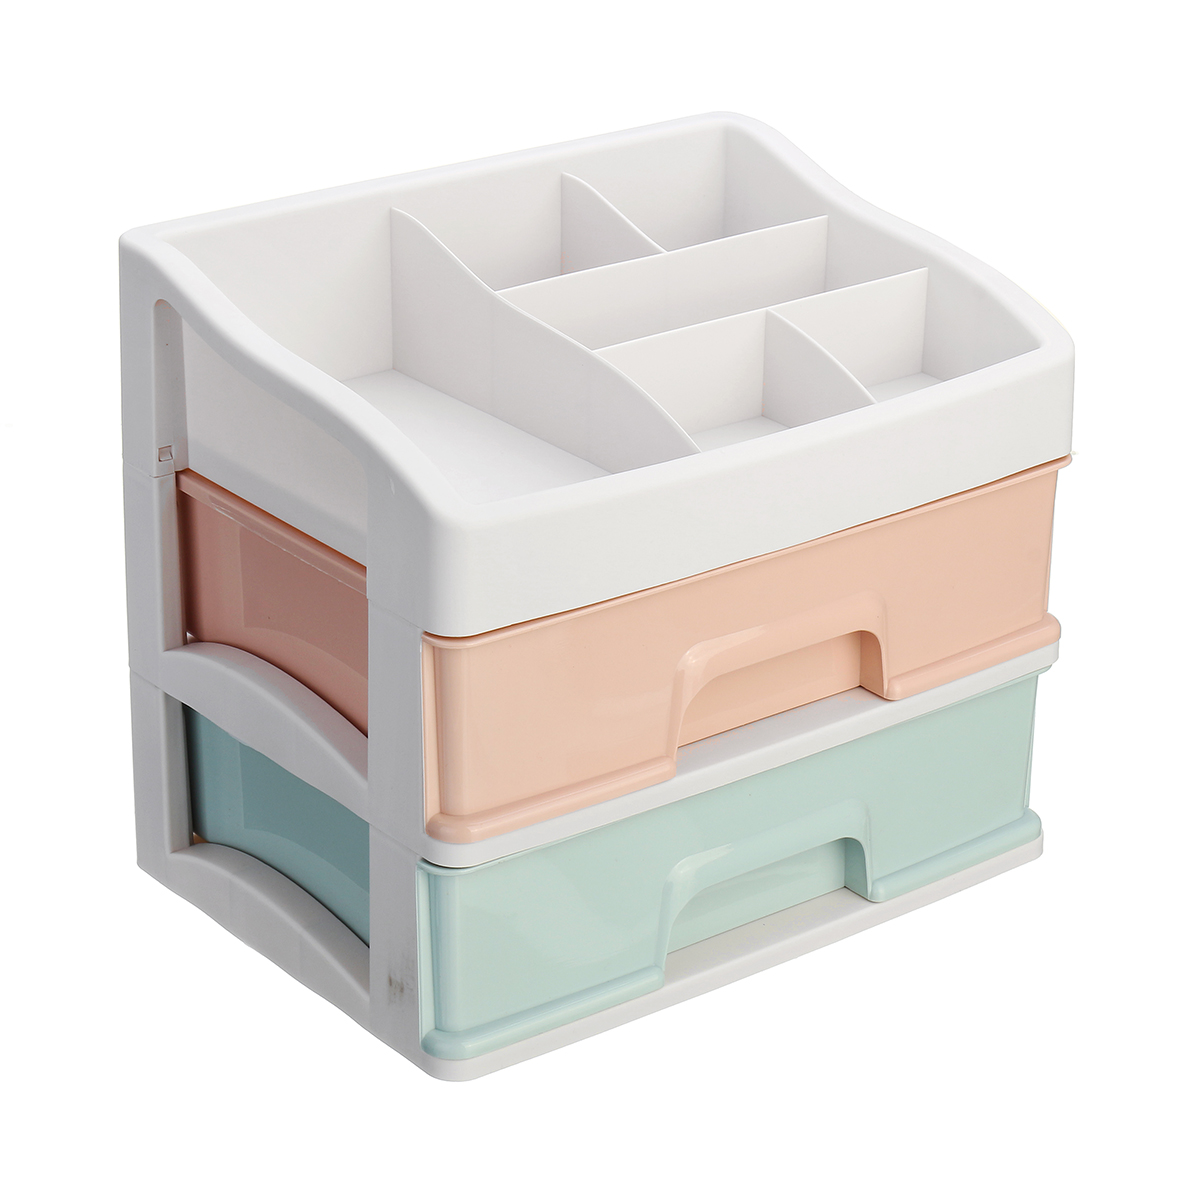 Plastic-Makeup-Holder-Box-Storage-Desktop-Container-Cosmetic--Jewelry-Container-Table-Organizer-1563970-6